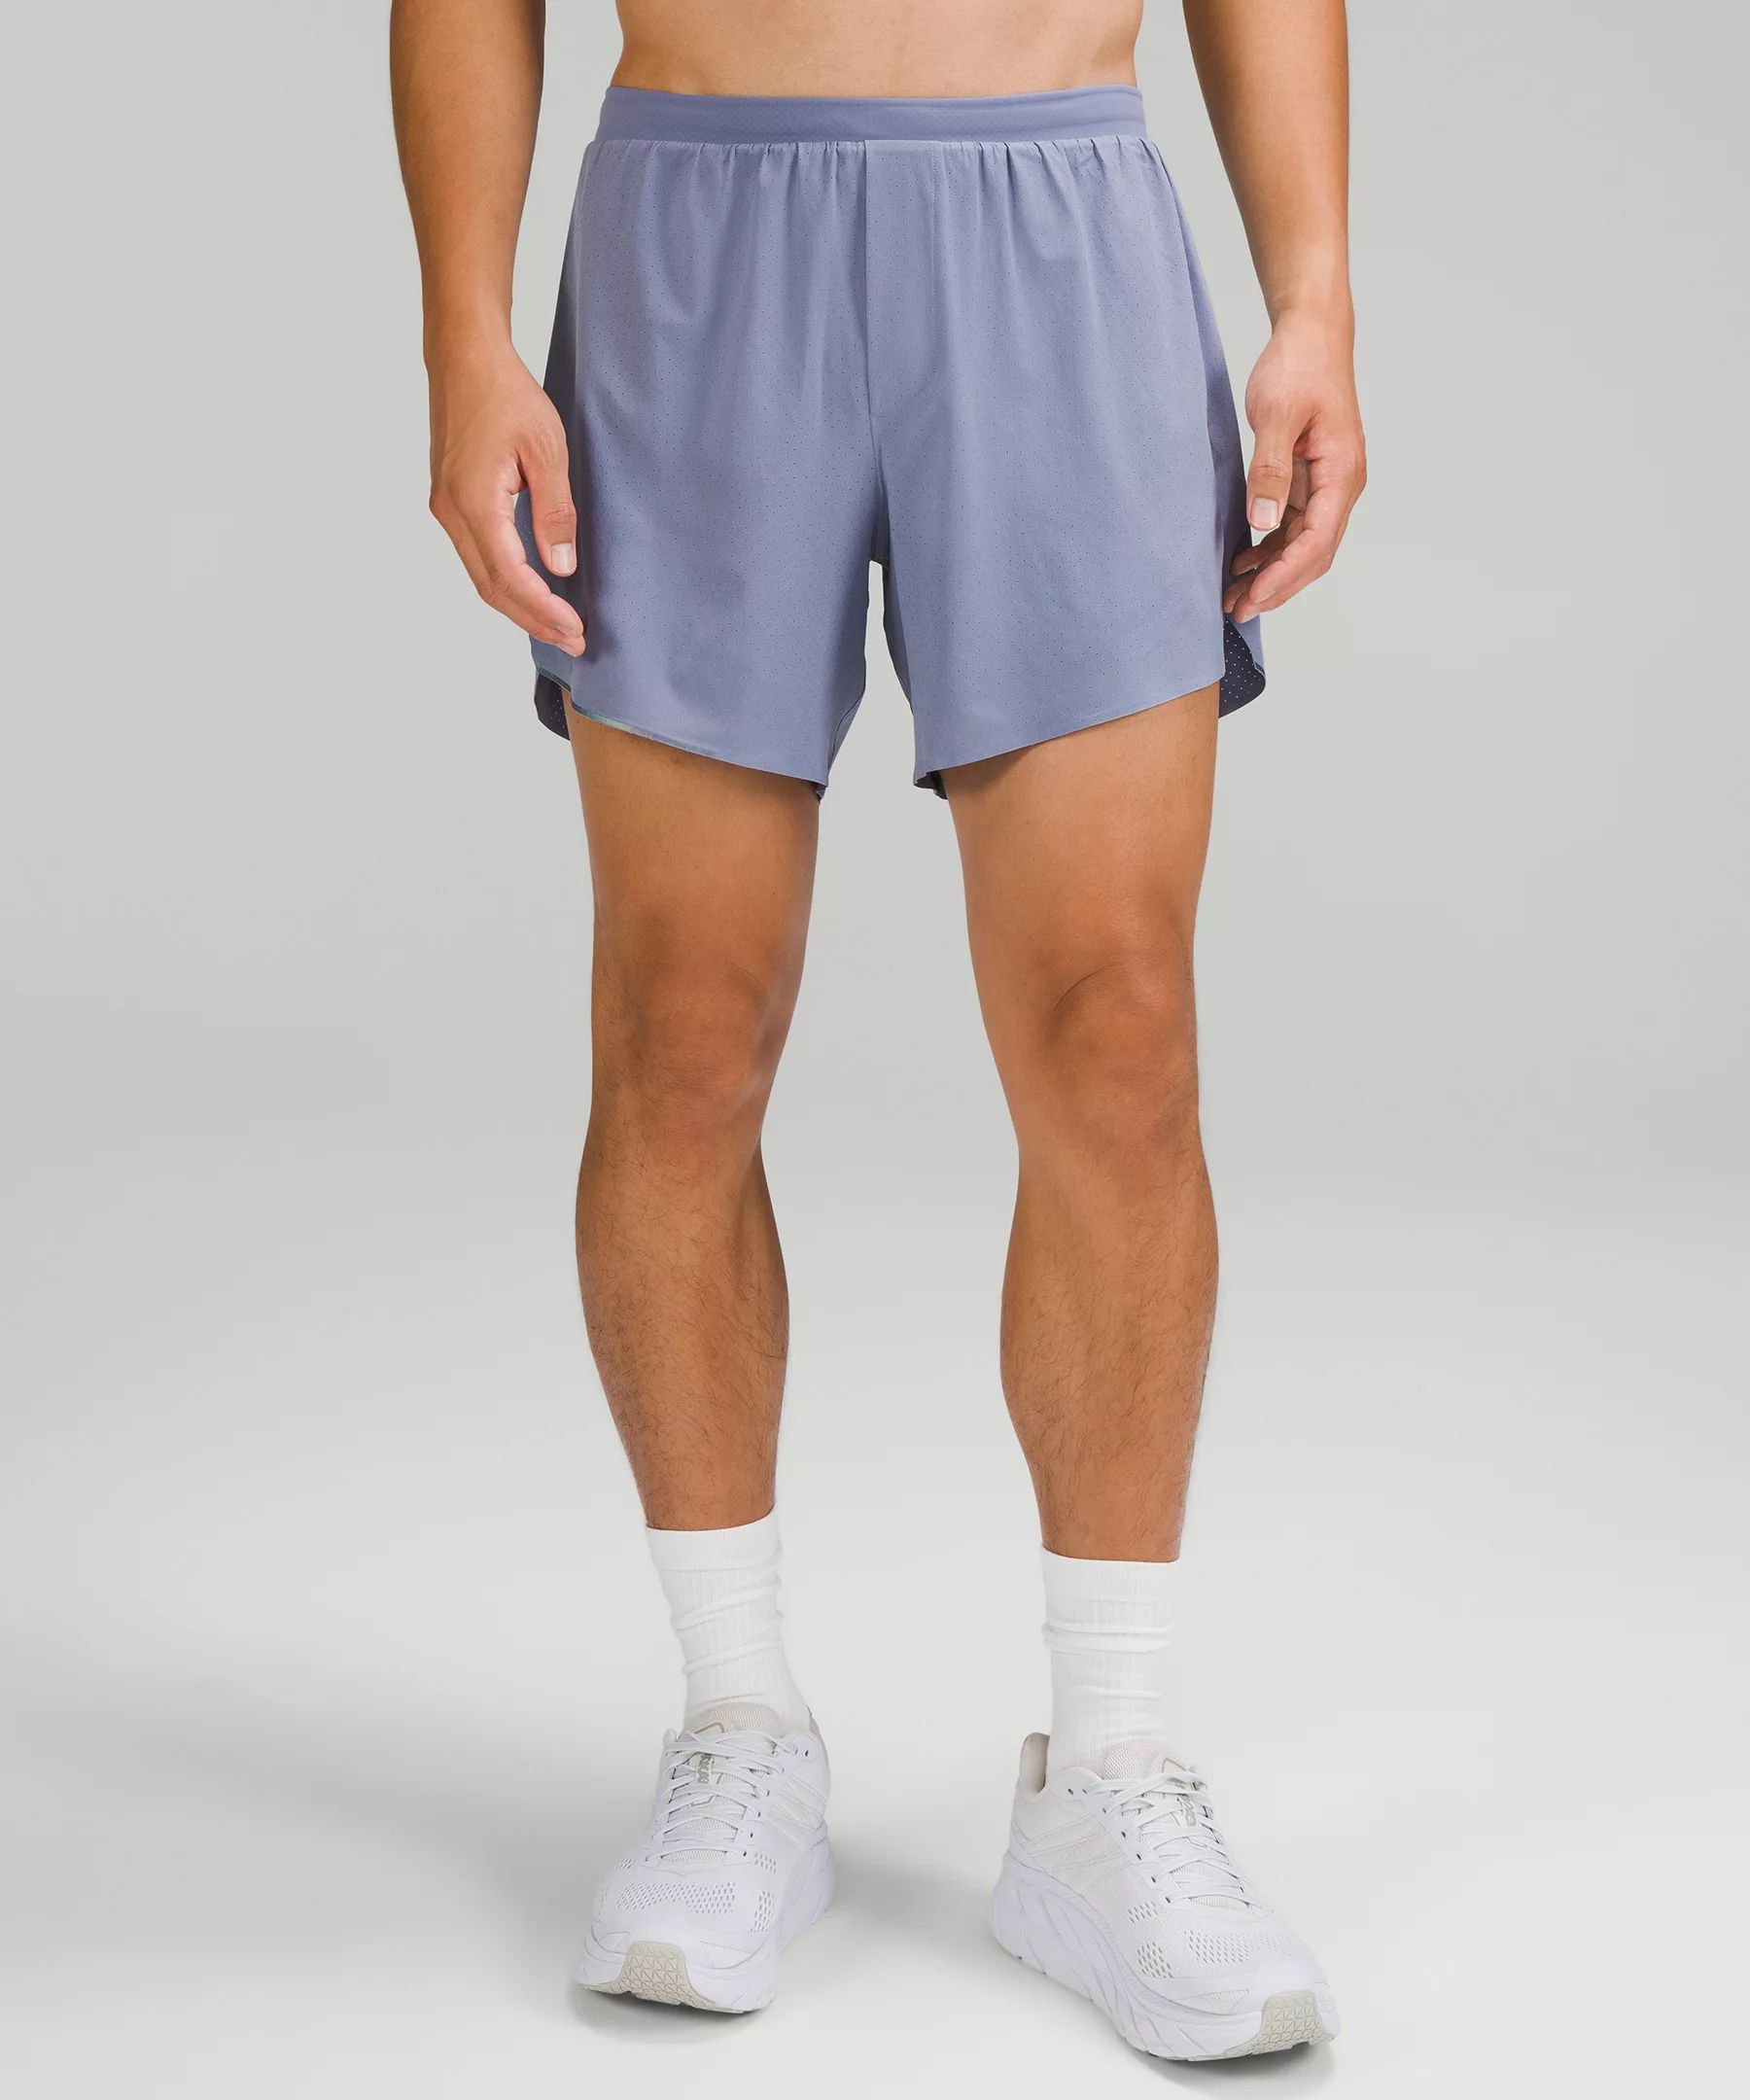 Fast and Free Lined Short 6" | Lululemon (US)